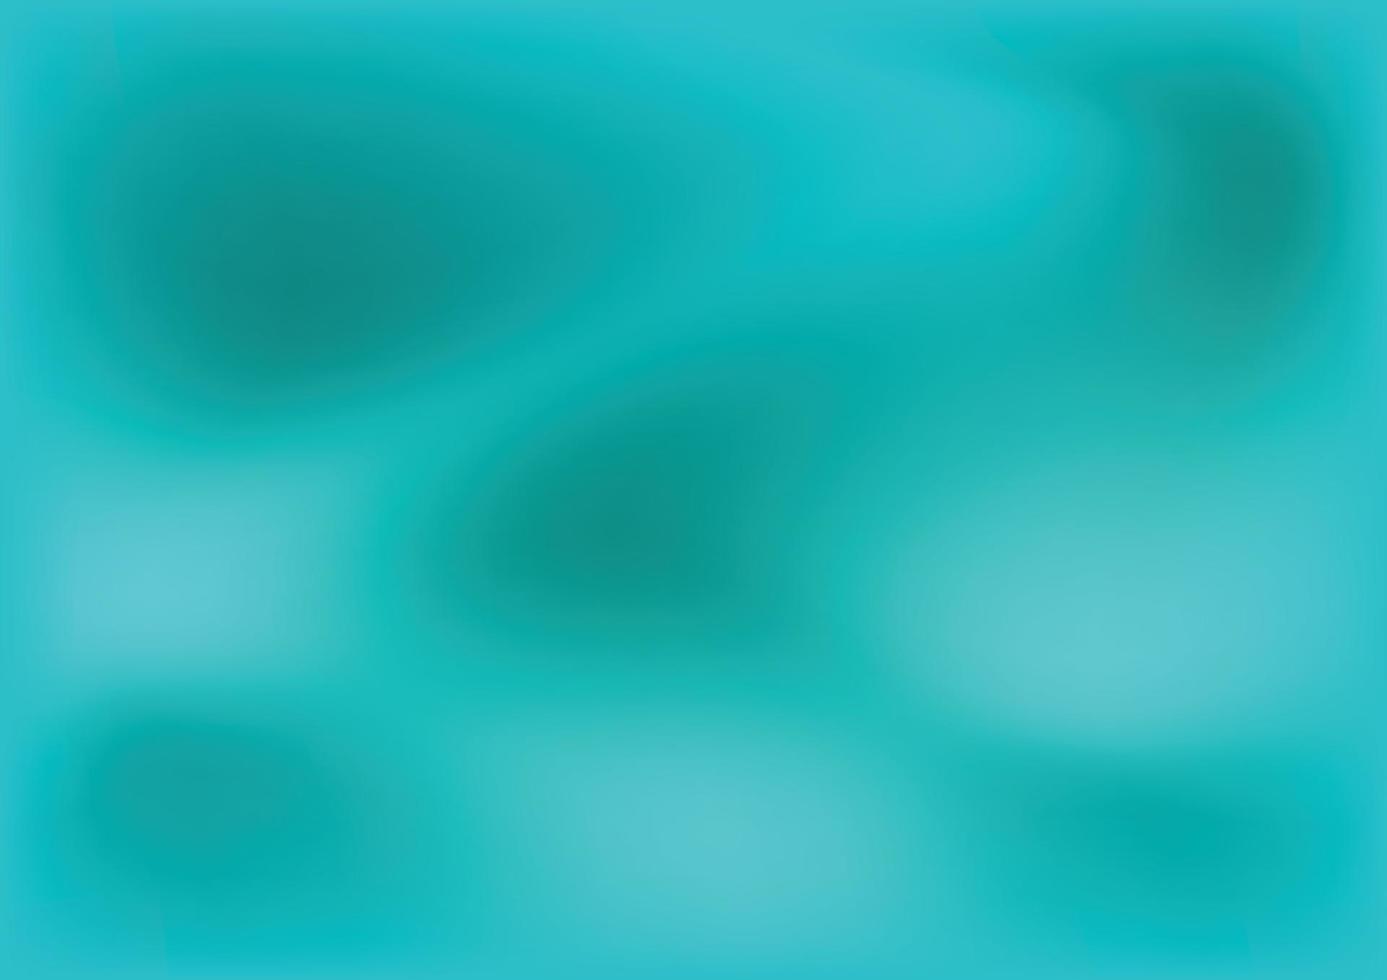 Abstract teal background. Blurred turquoise water backdrop. Vector illustration for your graphic design.